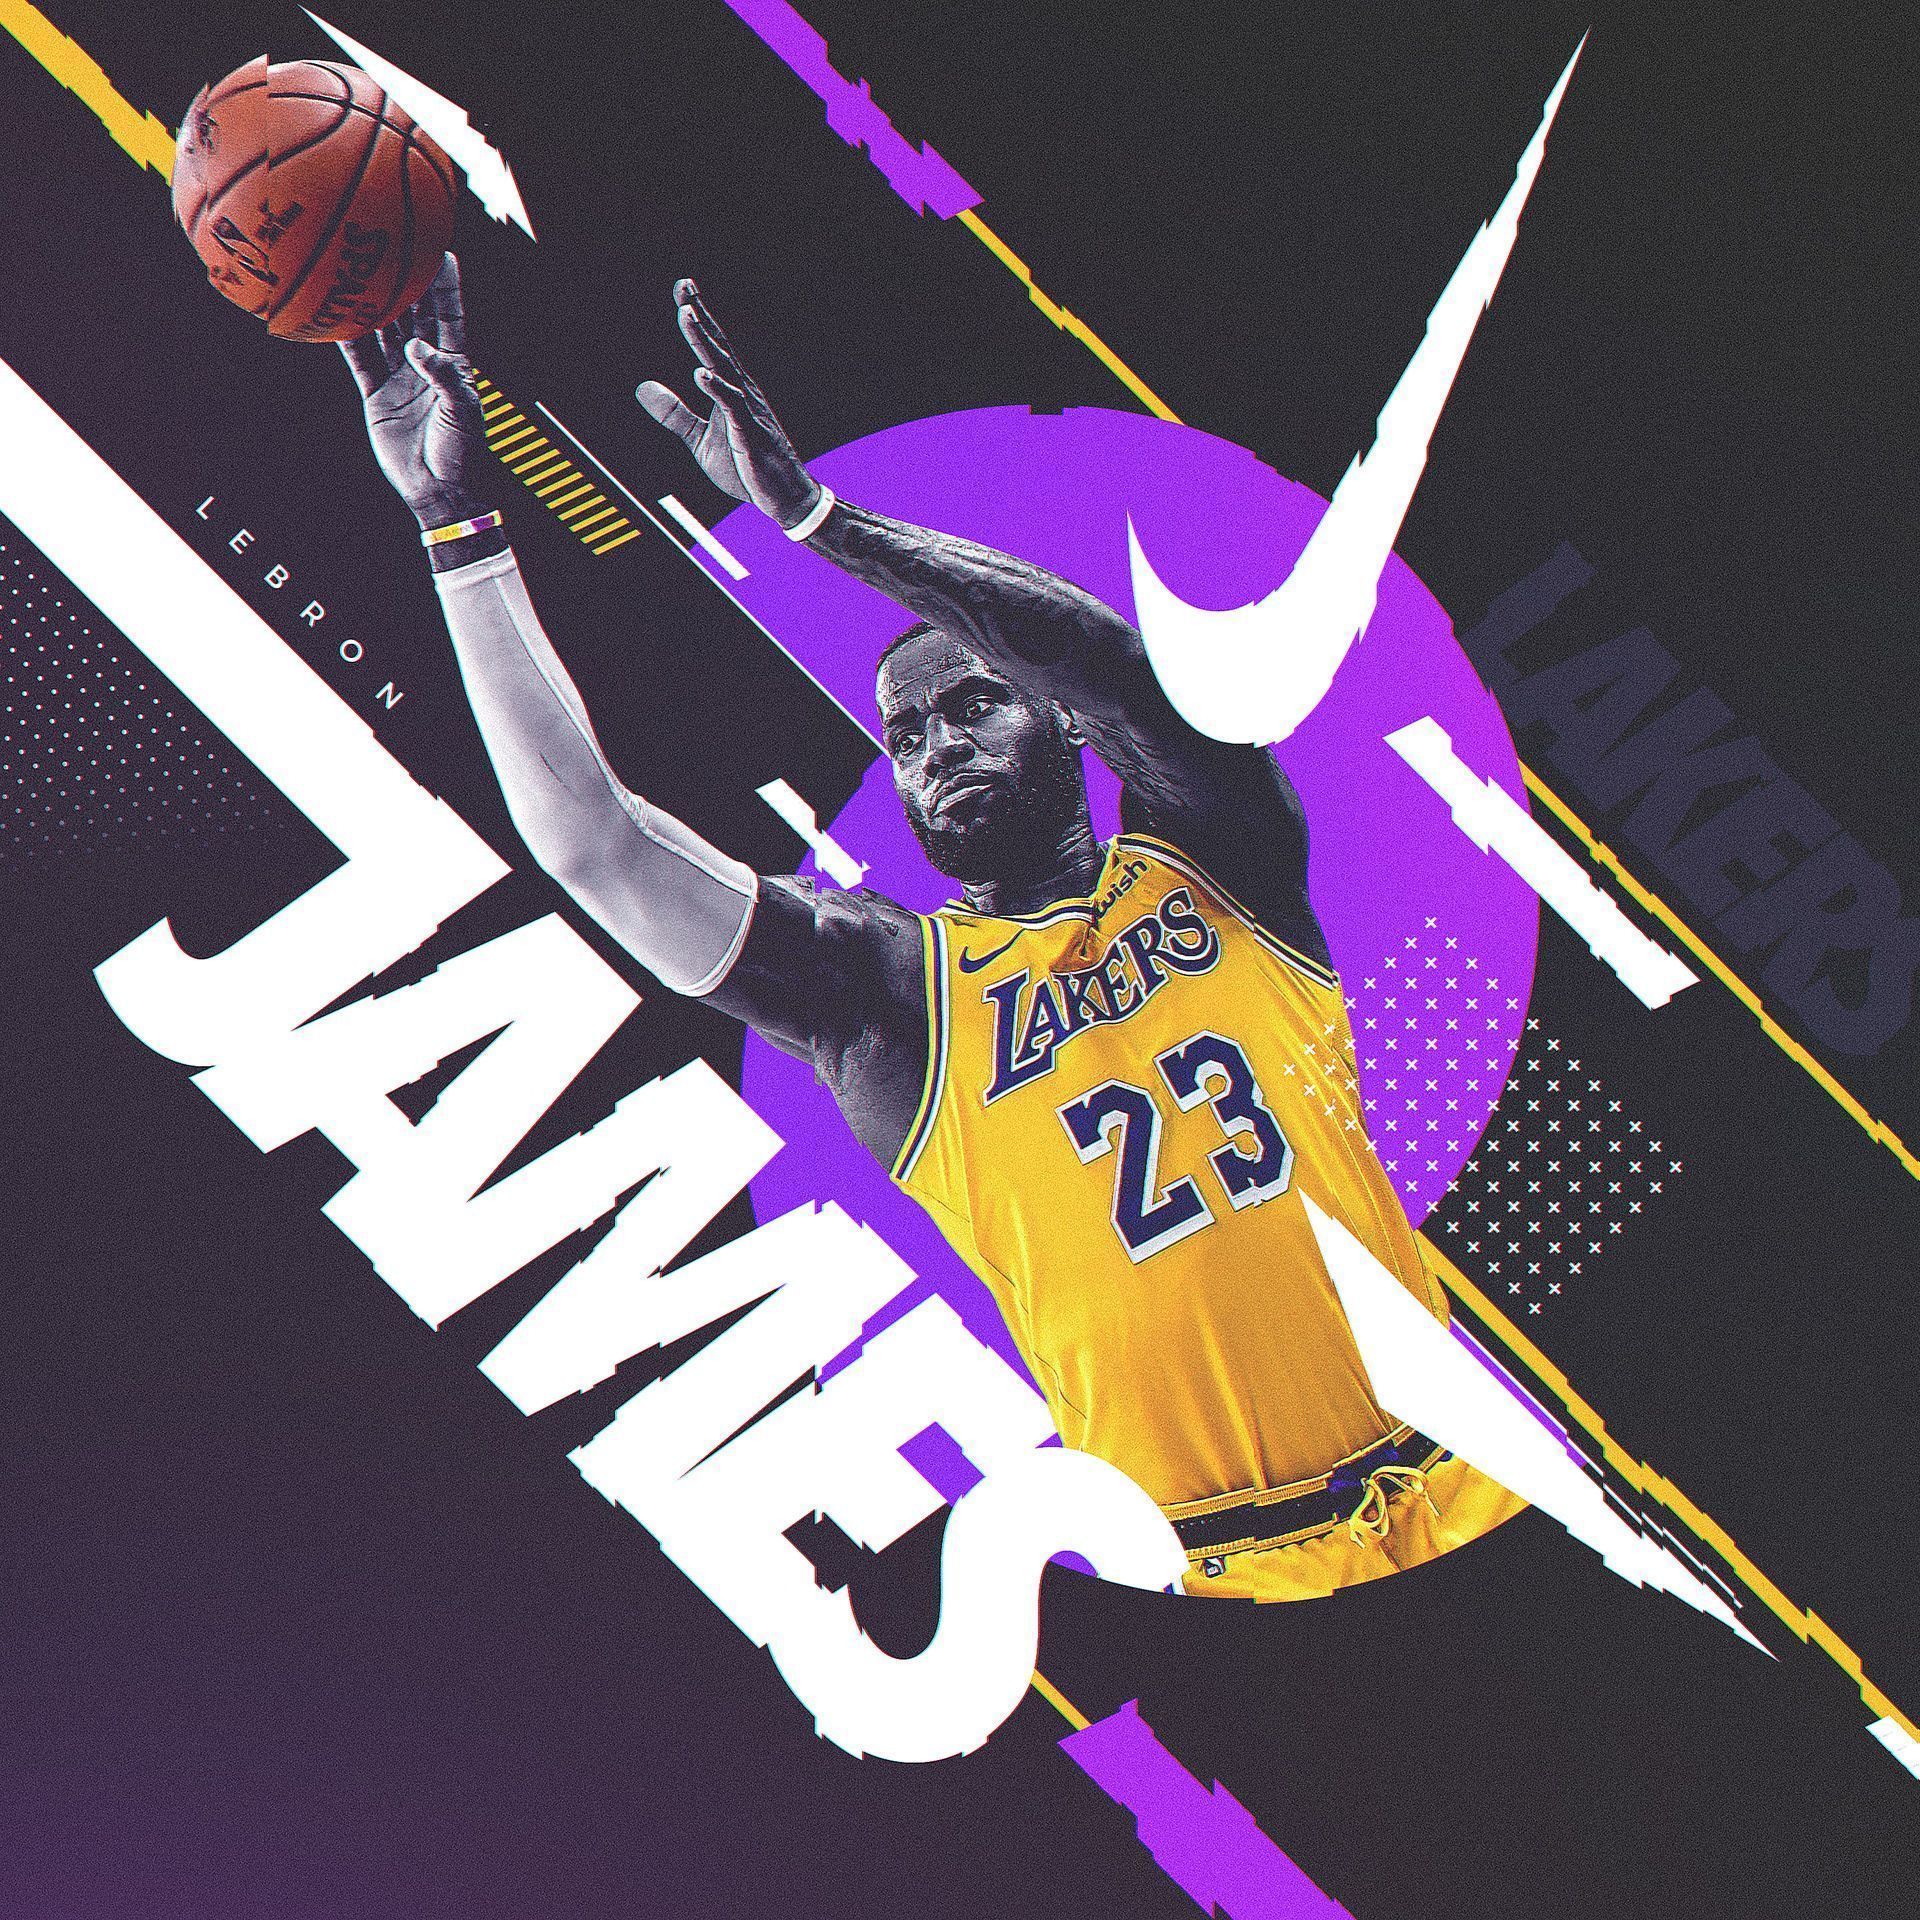 Lebron James in his Lakers jersey with the number 23 on the jersey - Lebron James